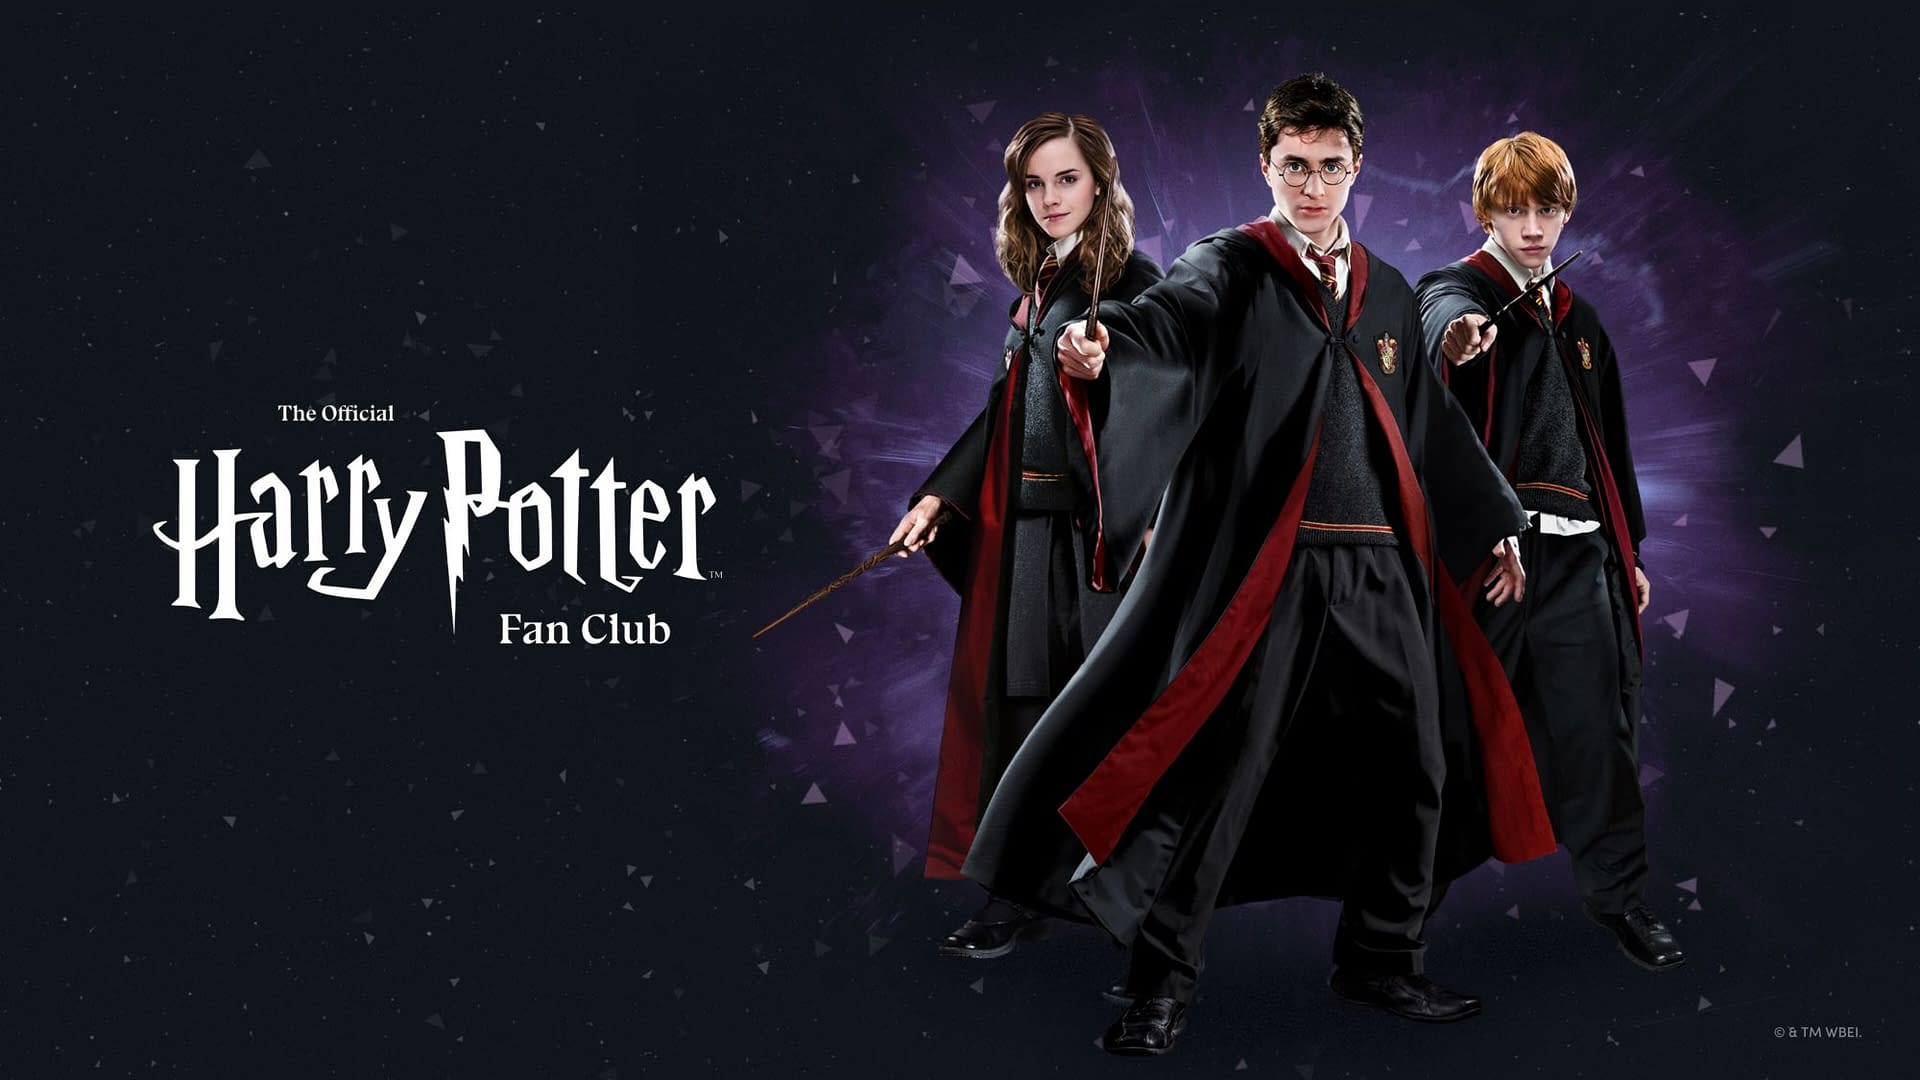 "Harry Potter" - Wizarding World Digital Introduces The Official Harry Potter Fan Club